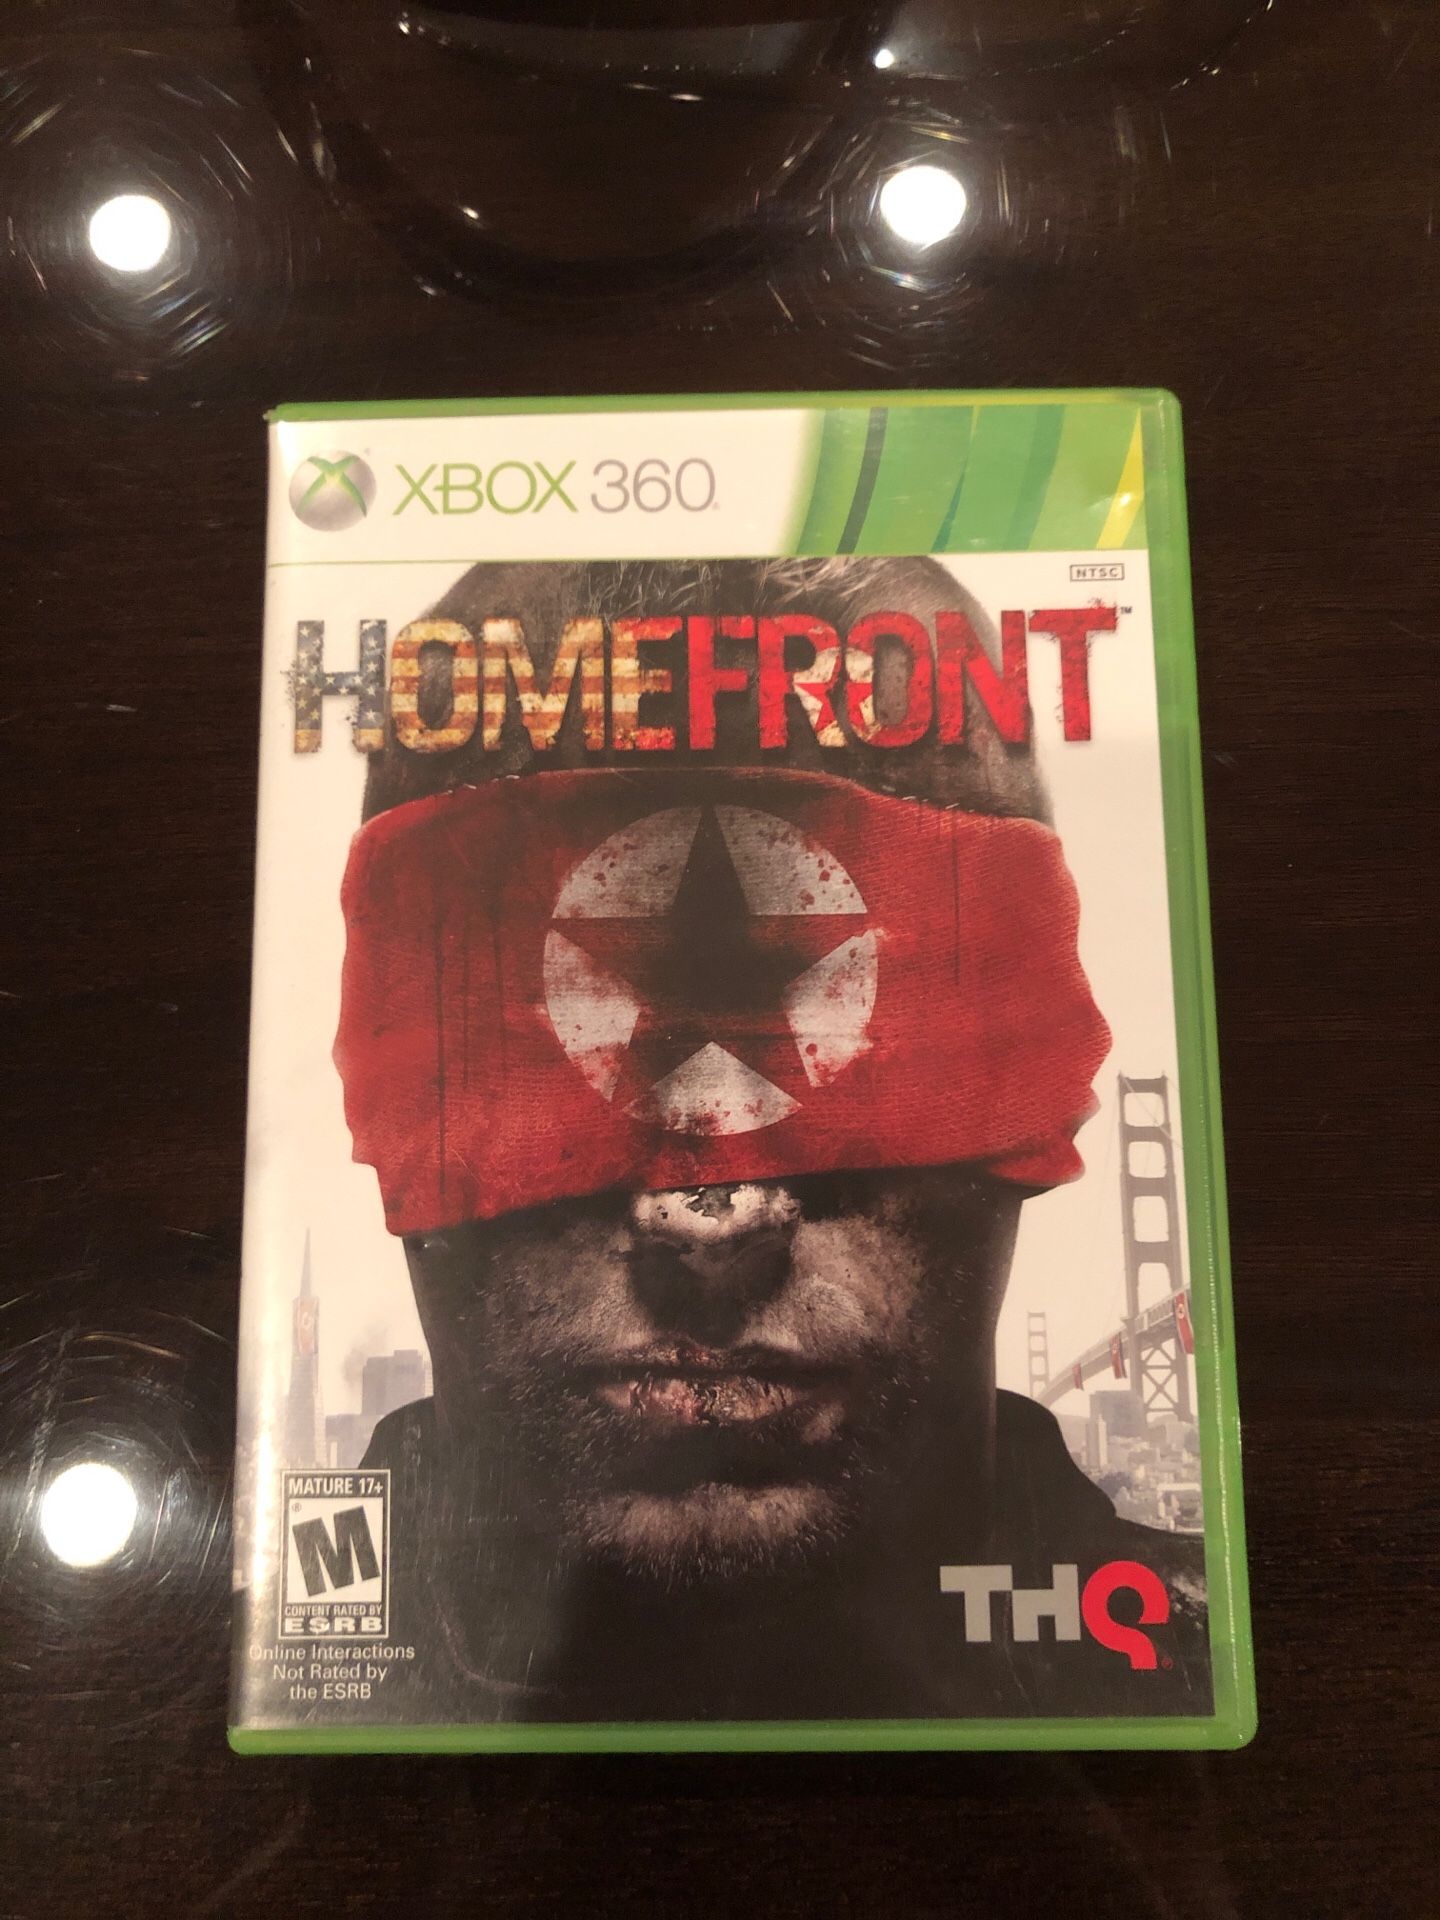 Home front Xbox 360 game